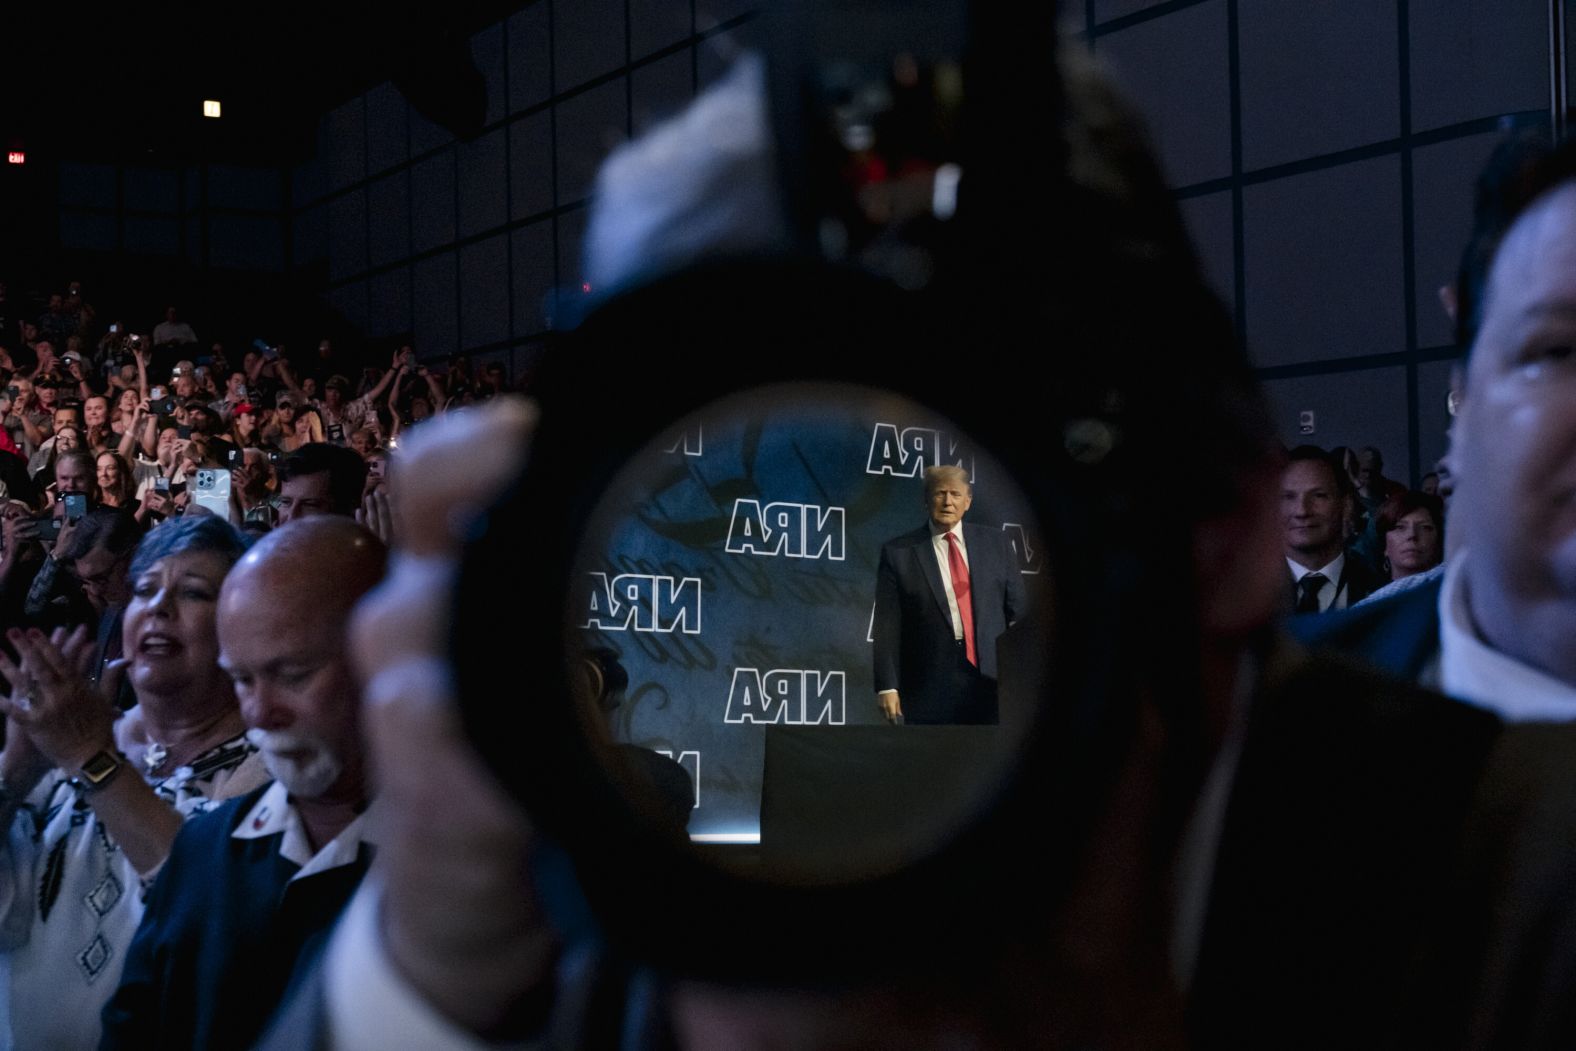 Trump is seen in the reflection of a camera lens as he appears at the National Rifle Association's annual convention in May 2022. Trump — and other GOP leaders who spoke at the event in Houston — <a href="index.php?page=&url=https%3A%2F%2Fwww.cnn.com%2F2022%2F05%2F27%2Fpolitics%2Fuvalde-donald-trump-nra-convention%2Findex.html" target="_blank">rejected efforts to overhaul gun laws,</a> and they mocked Democrats and activists calling for change.